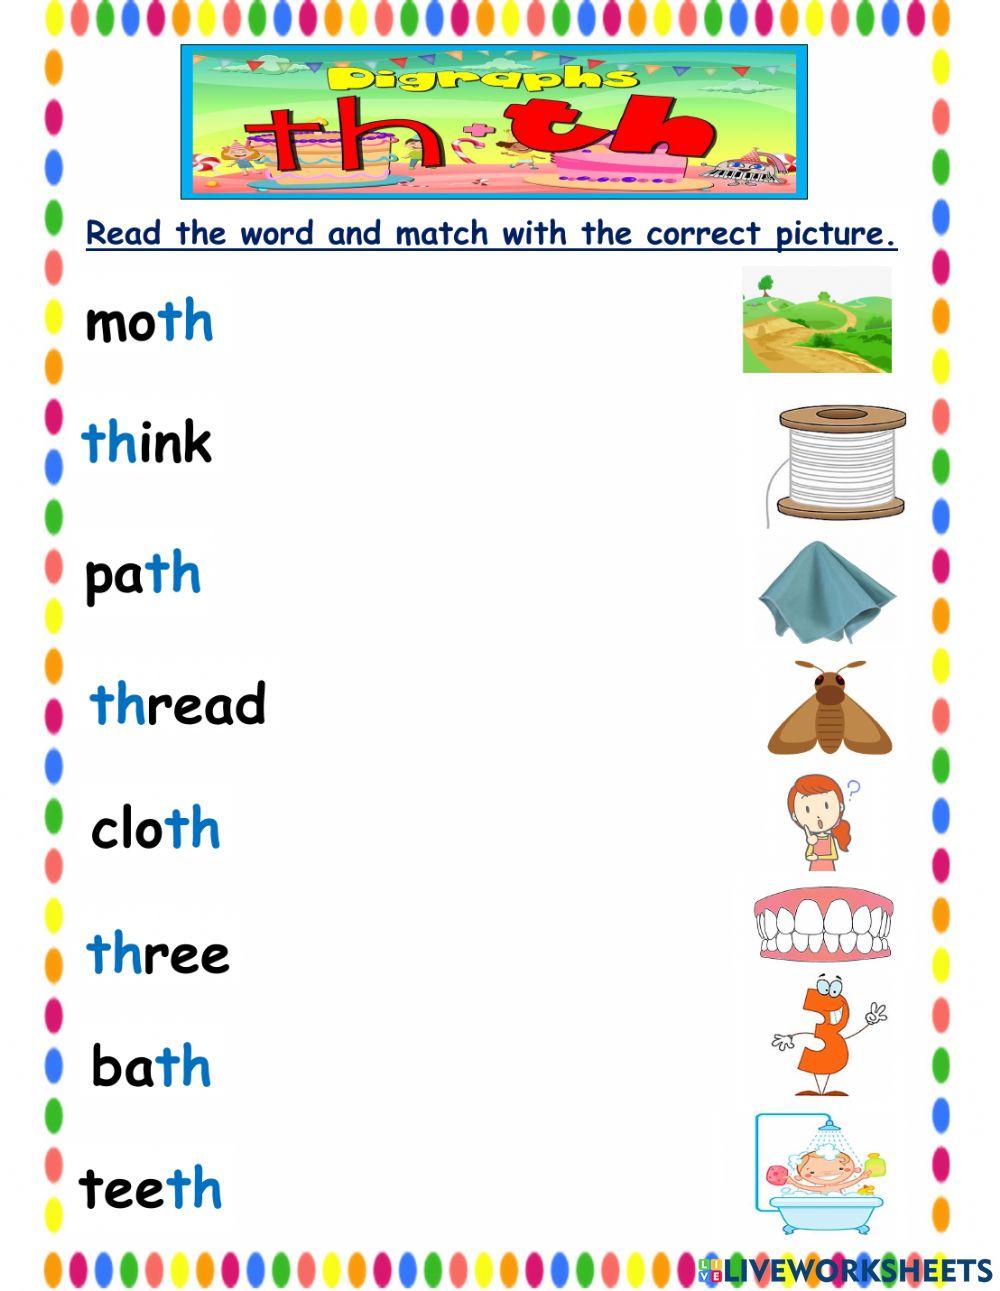 Digraph-th- beginning and ending sound words